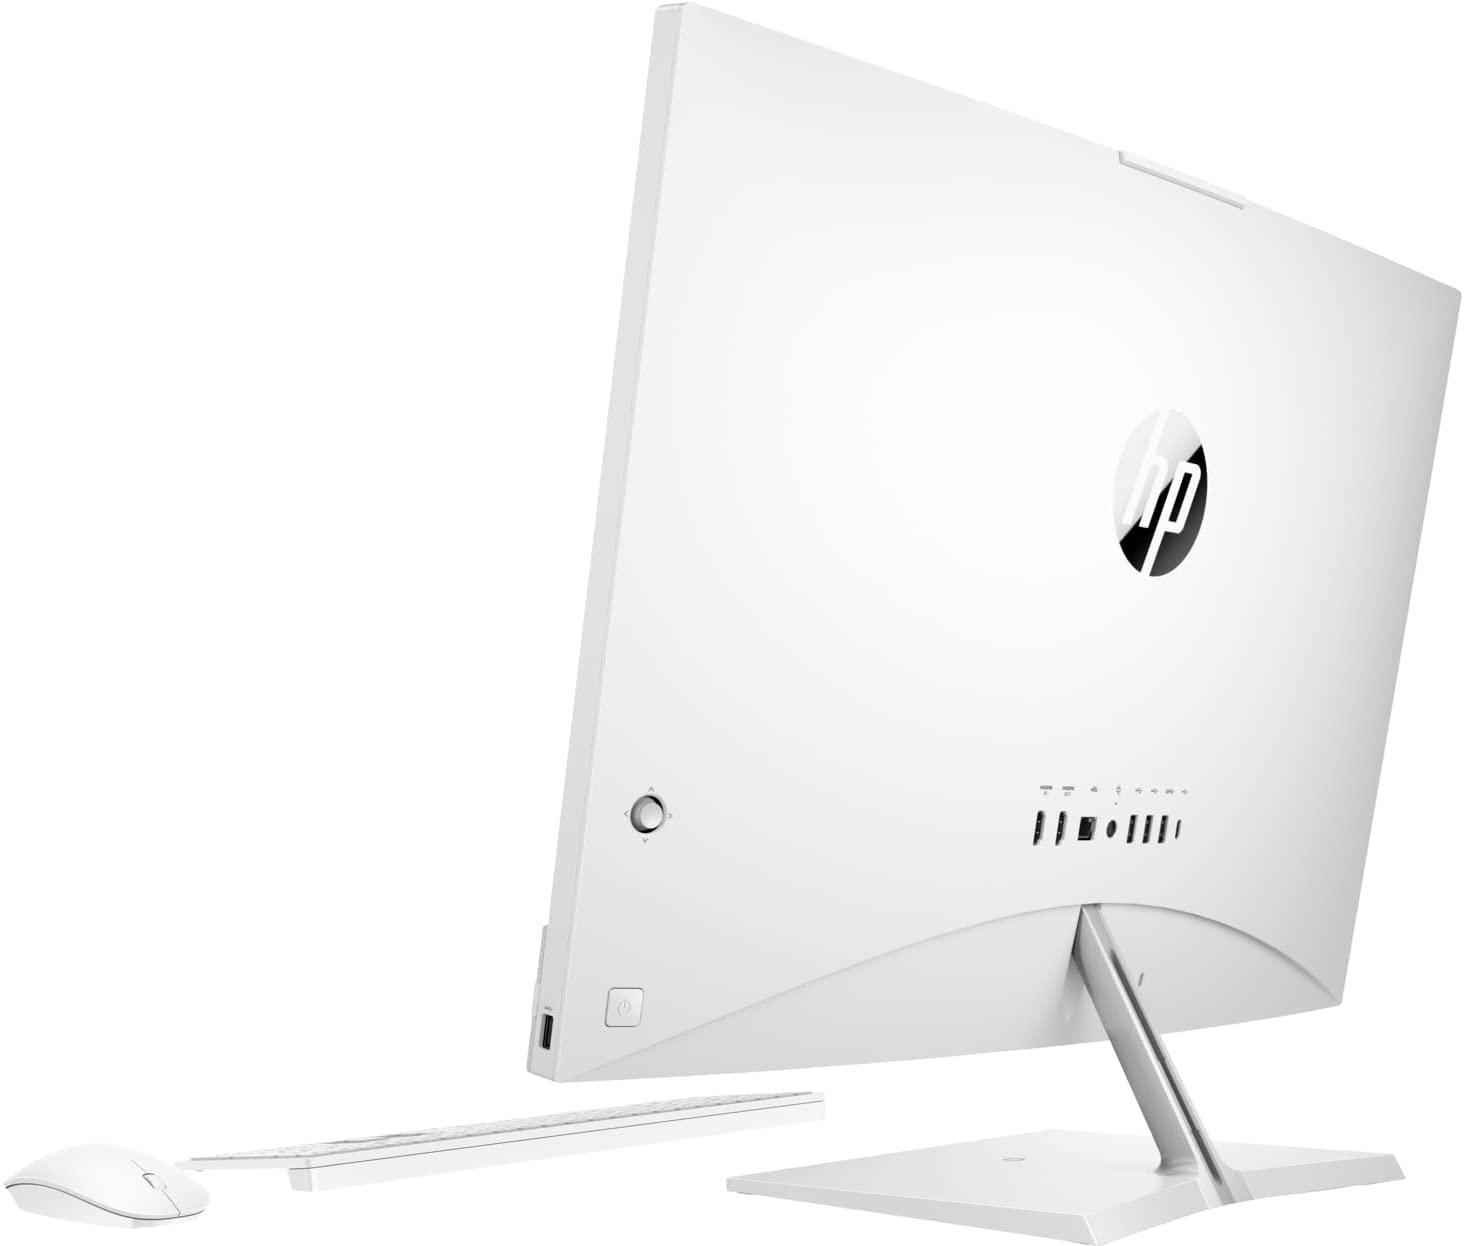 HP Pavilion 27 Touch Desktop 2TB SSD 32GB RAM Extreme (Intel Core i7-11700 Processor Turbo Boost to 4.50GHz, 32 GB RAM, 2 TB SSD, 27-inch FullHD Touchscreen, Win 11) PC Computer All-in-One